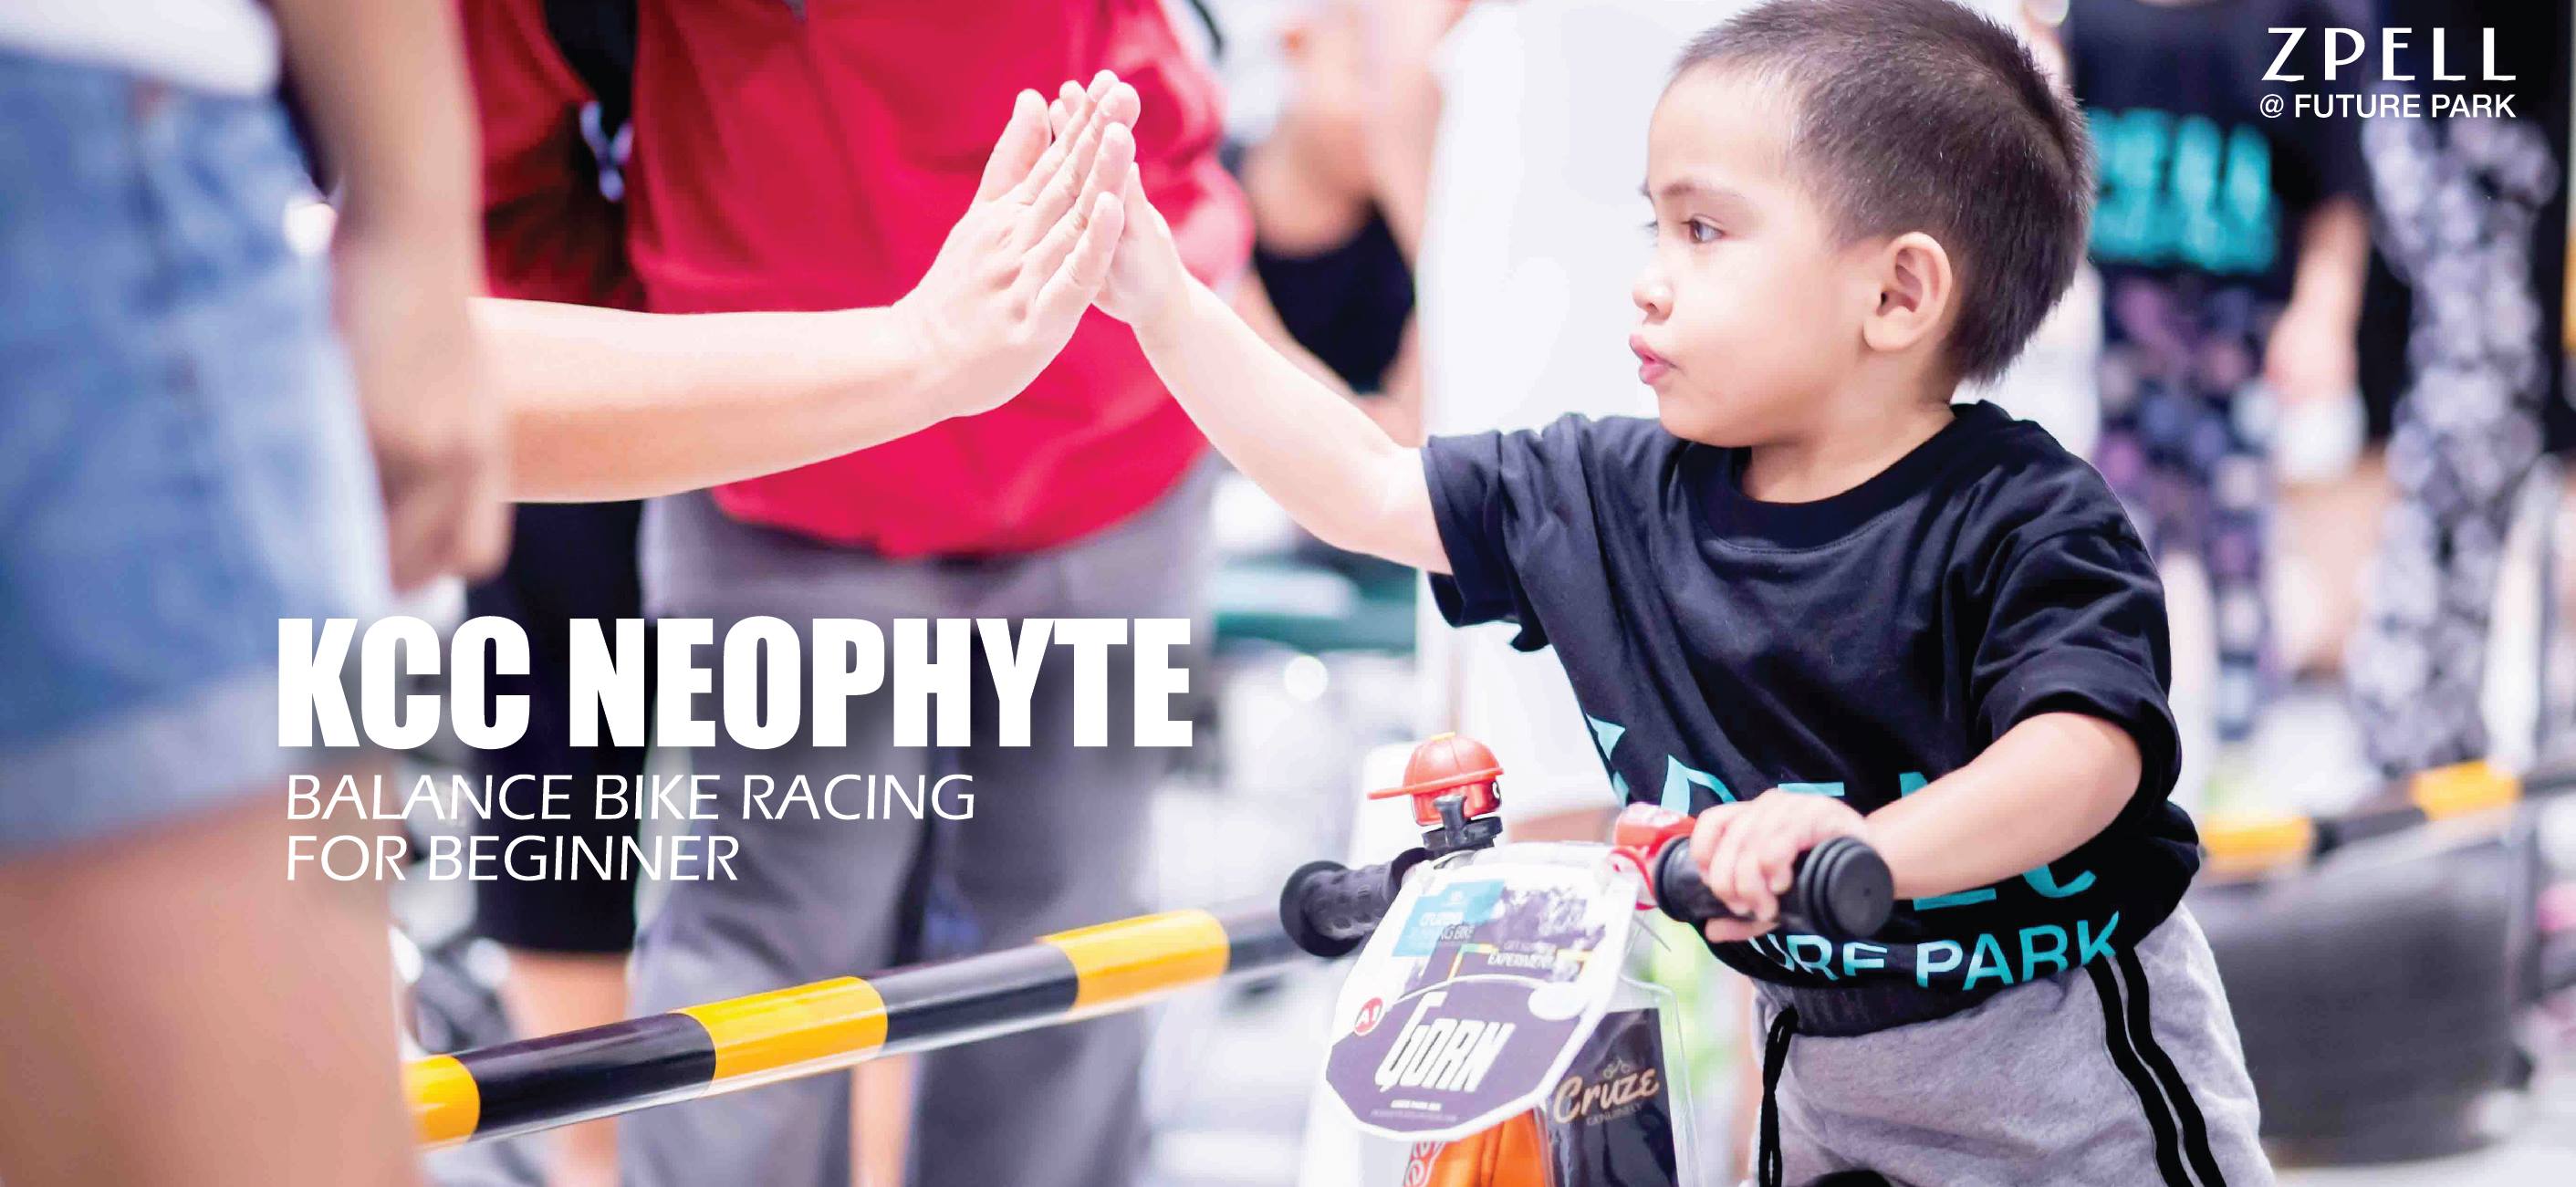 KCC Neophyte (beginner racing) presented by zpell@future park